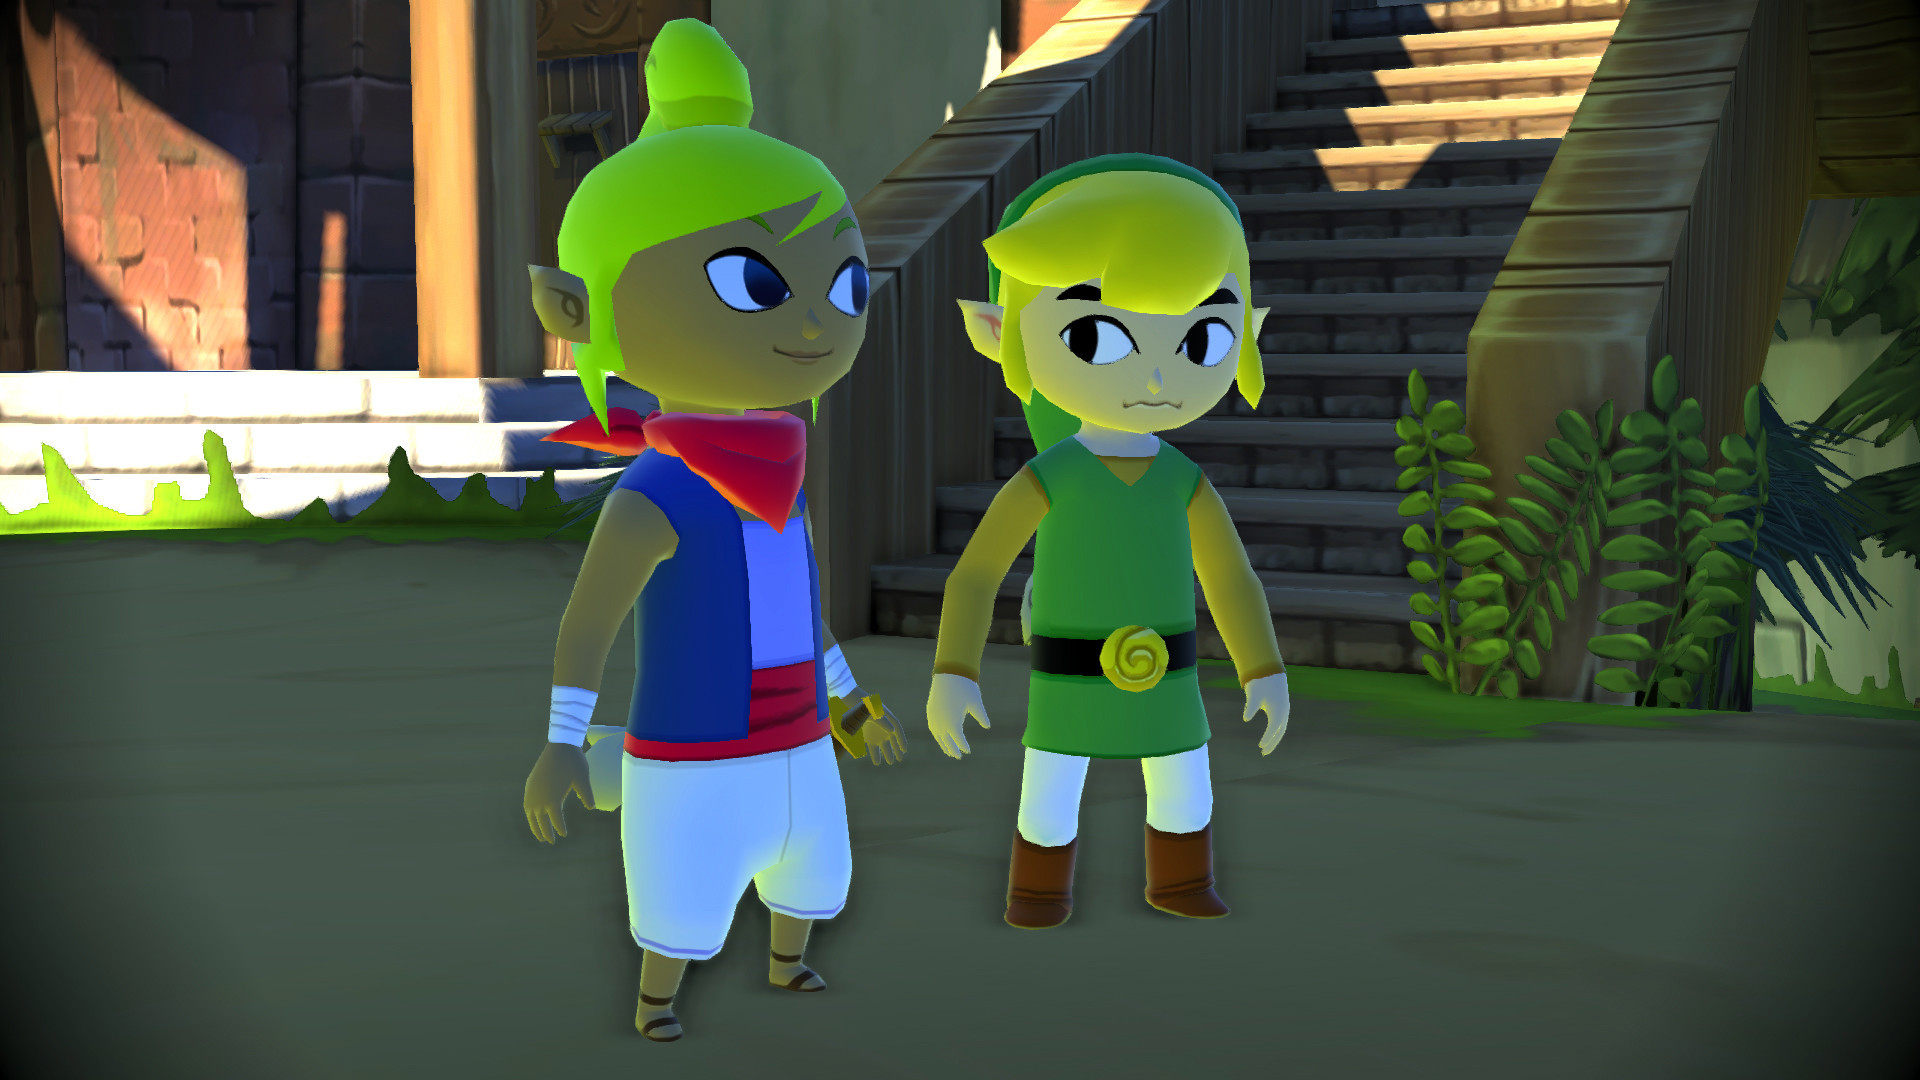 1920x1080 Wind Waker HD download size revealed – Pro controller support